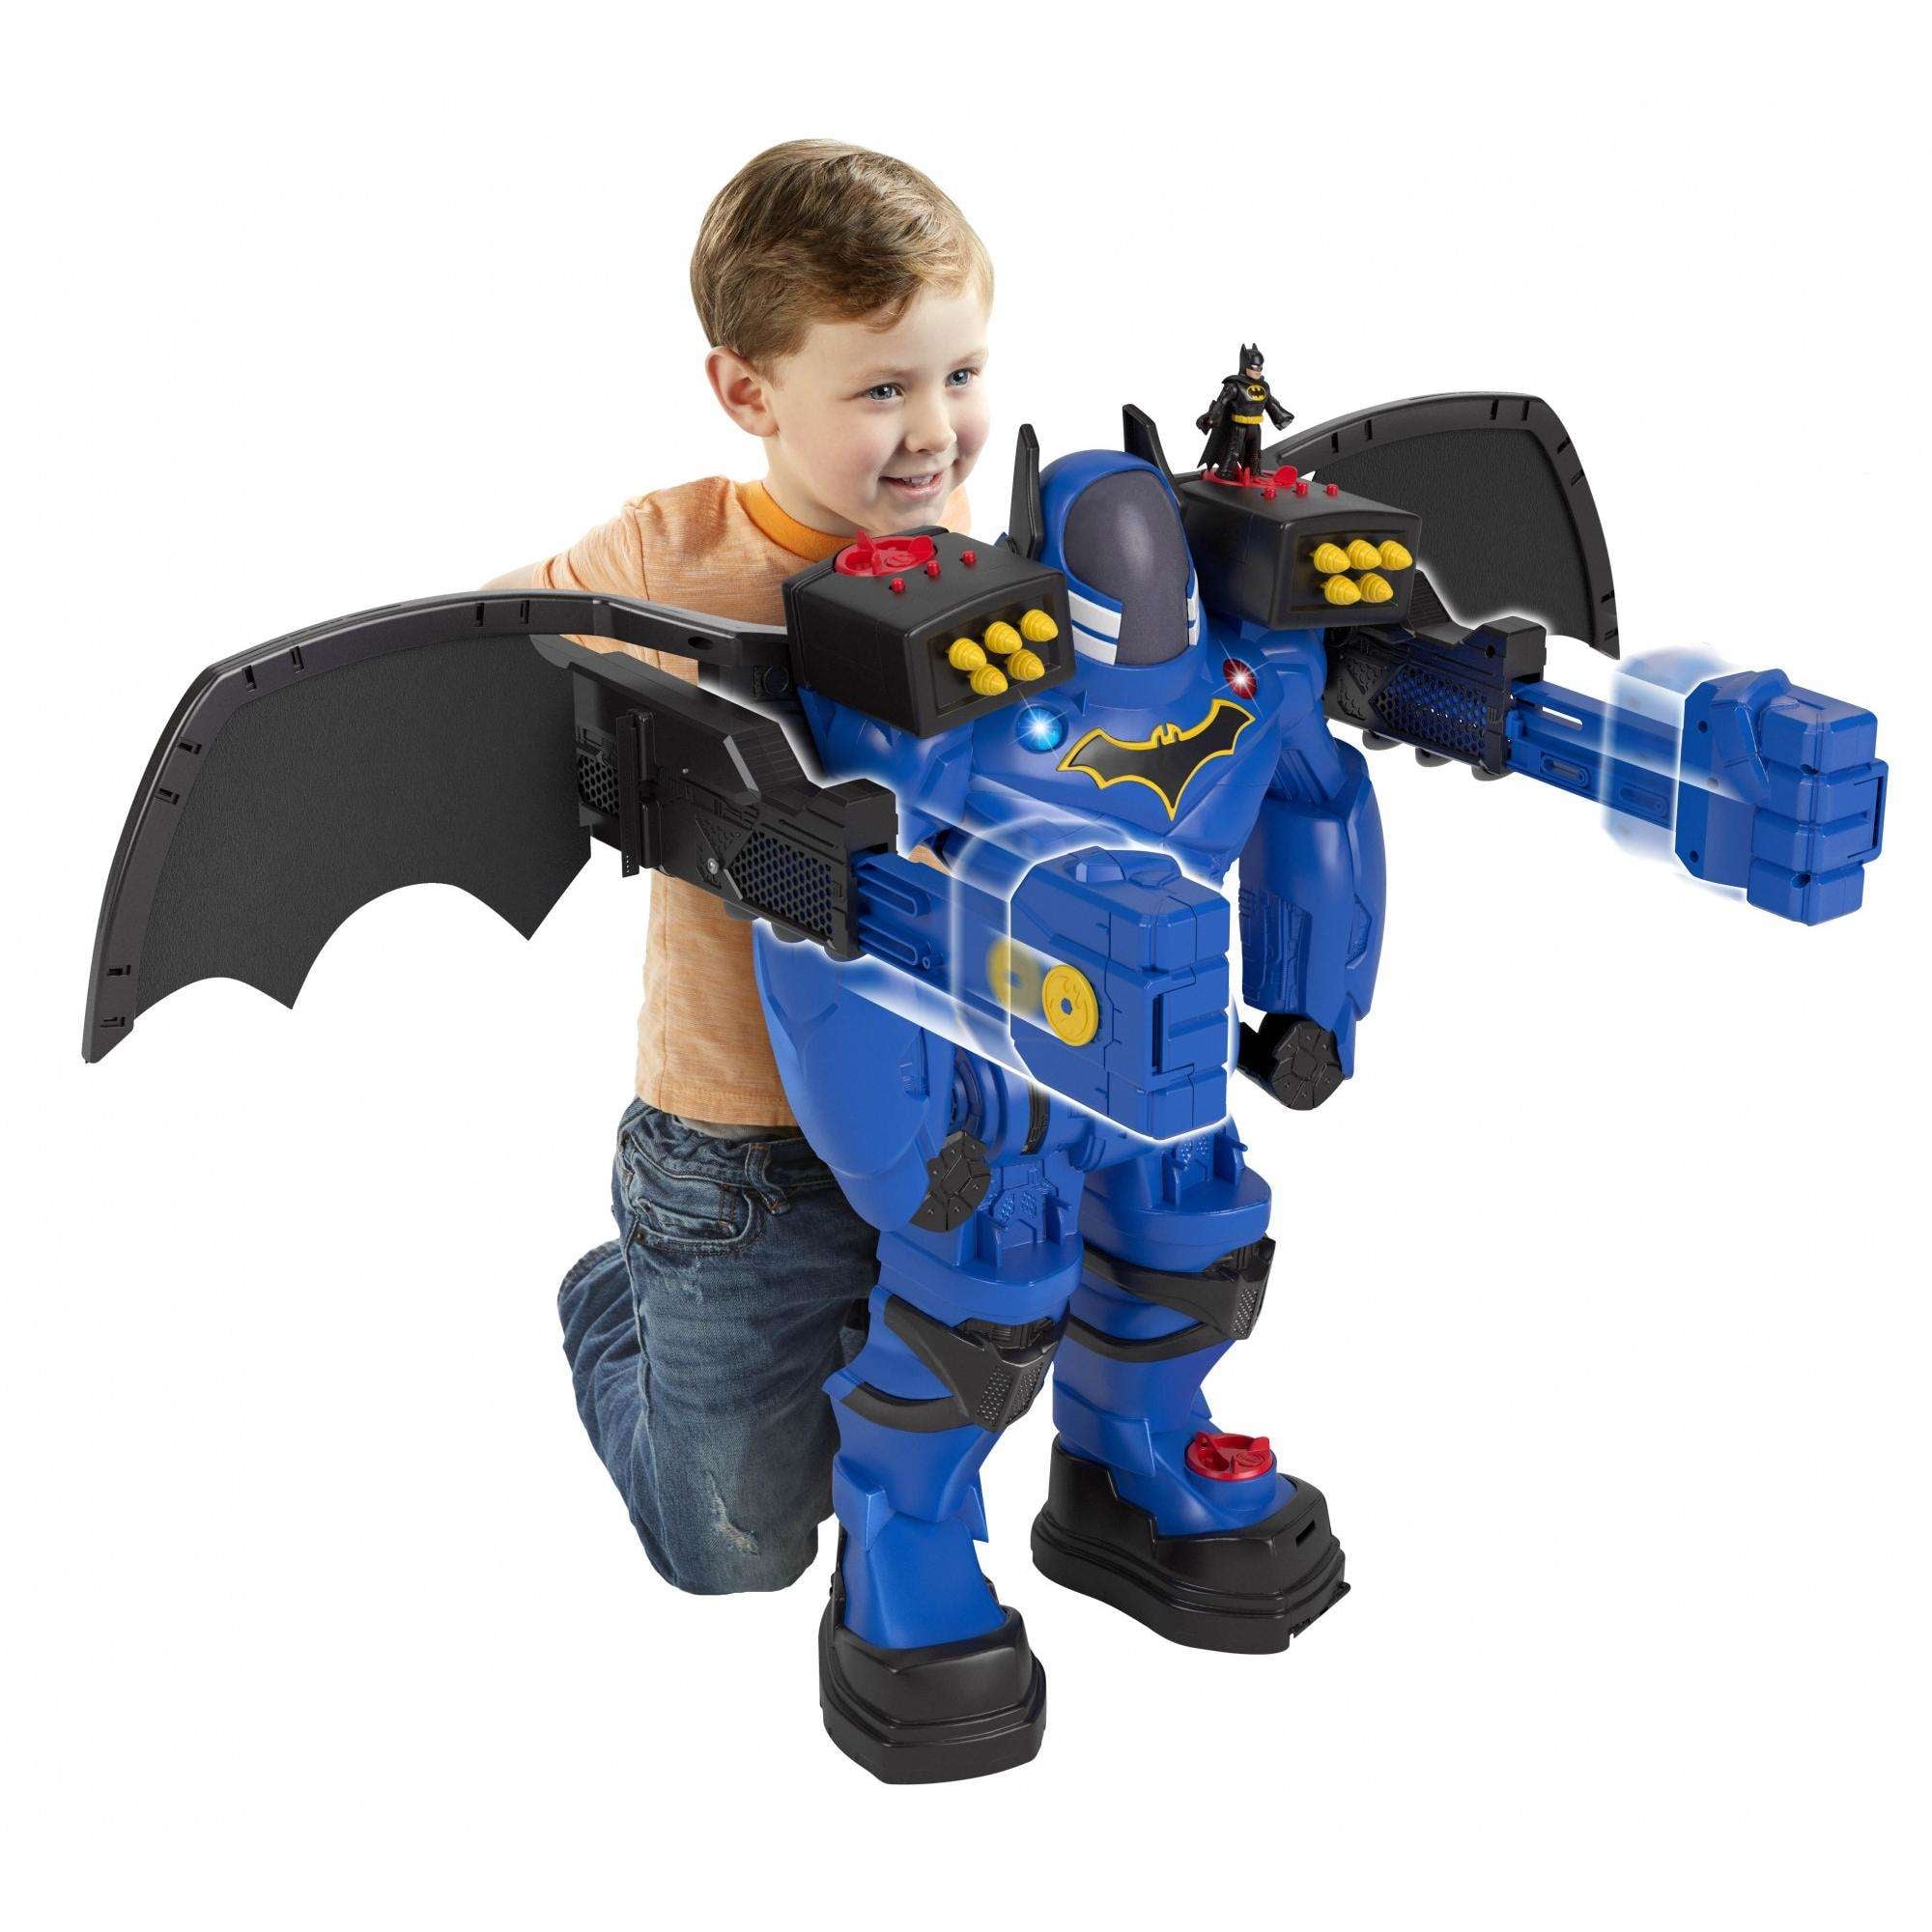 Imaginext DC Super Friends Batman Batbot Xtreme | What We Hope will be on  the Hottest Toy List For the 2017 Holiday Season | POPSUGAR Family Photo 4